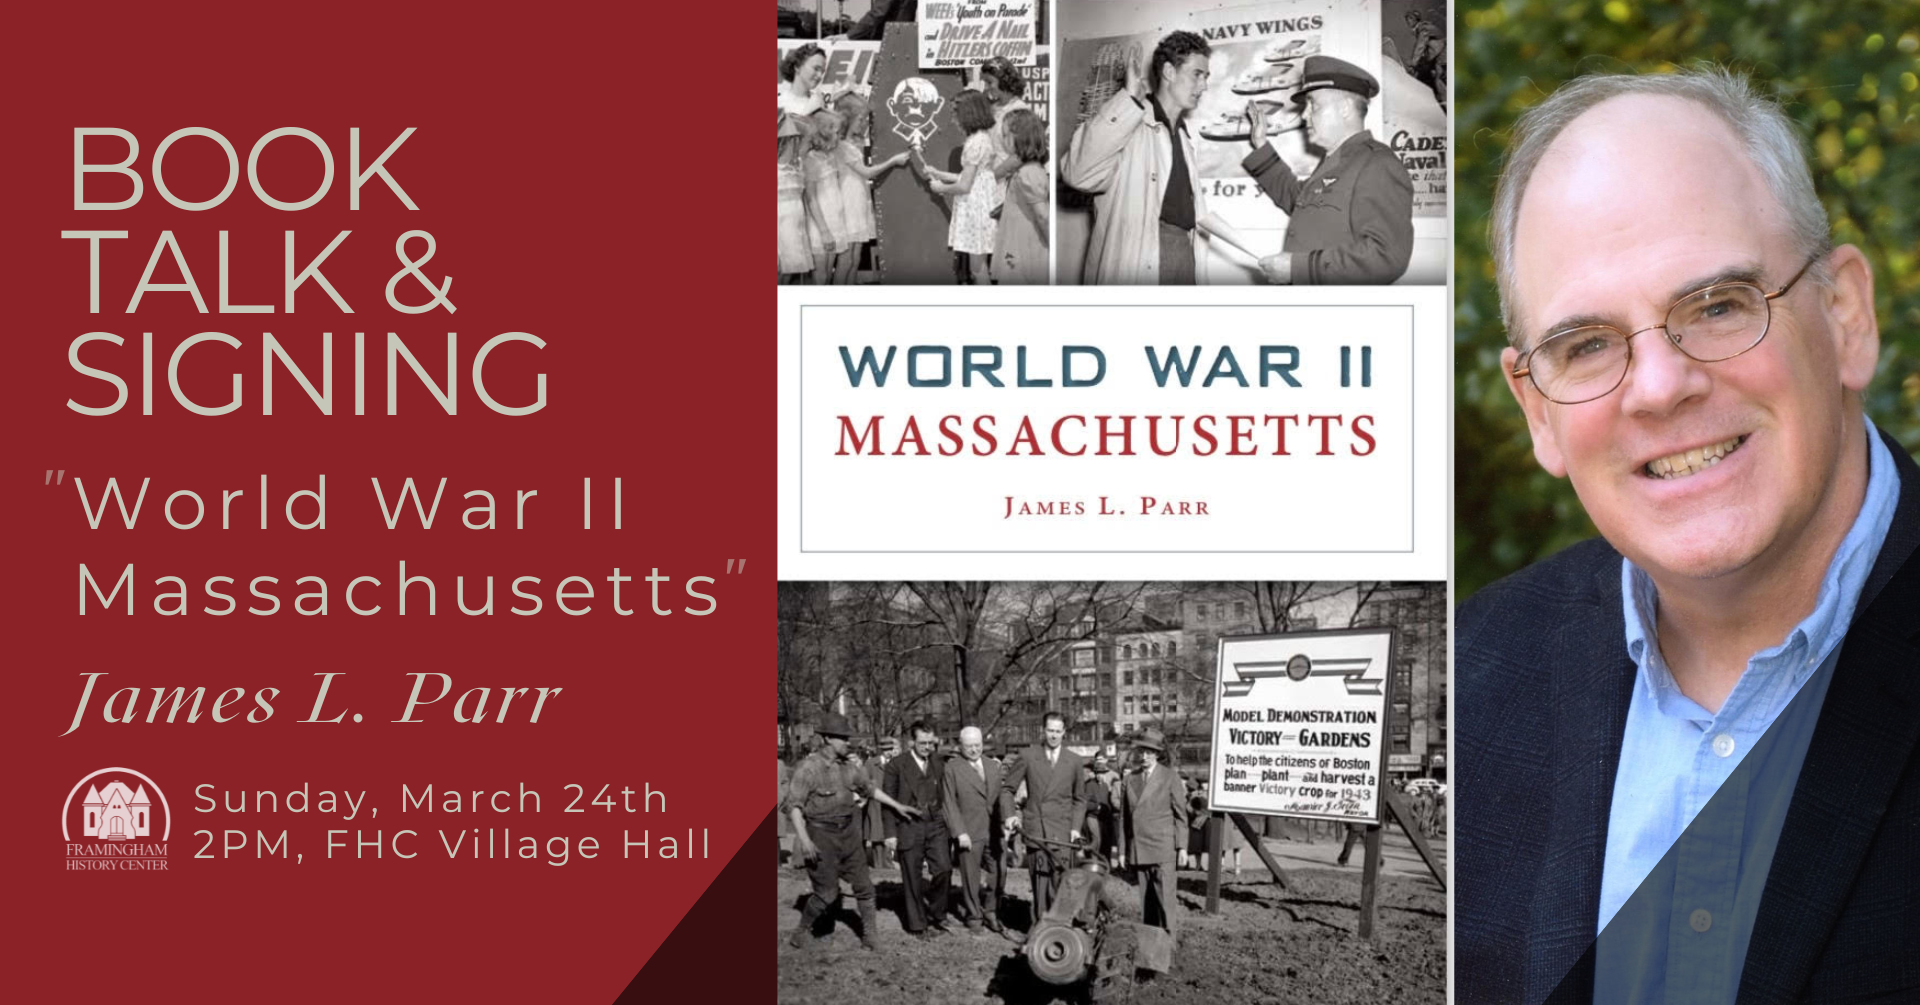 Author James L. Parr with the cover of newest book, "World War II Massachusetts"